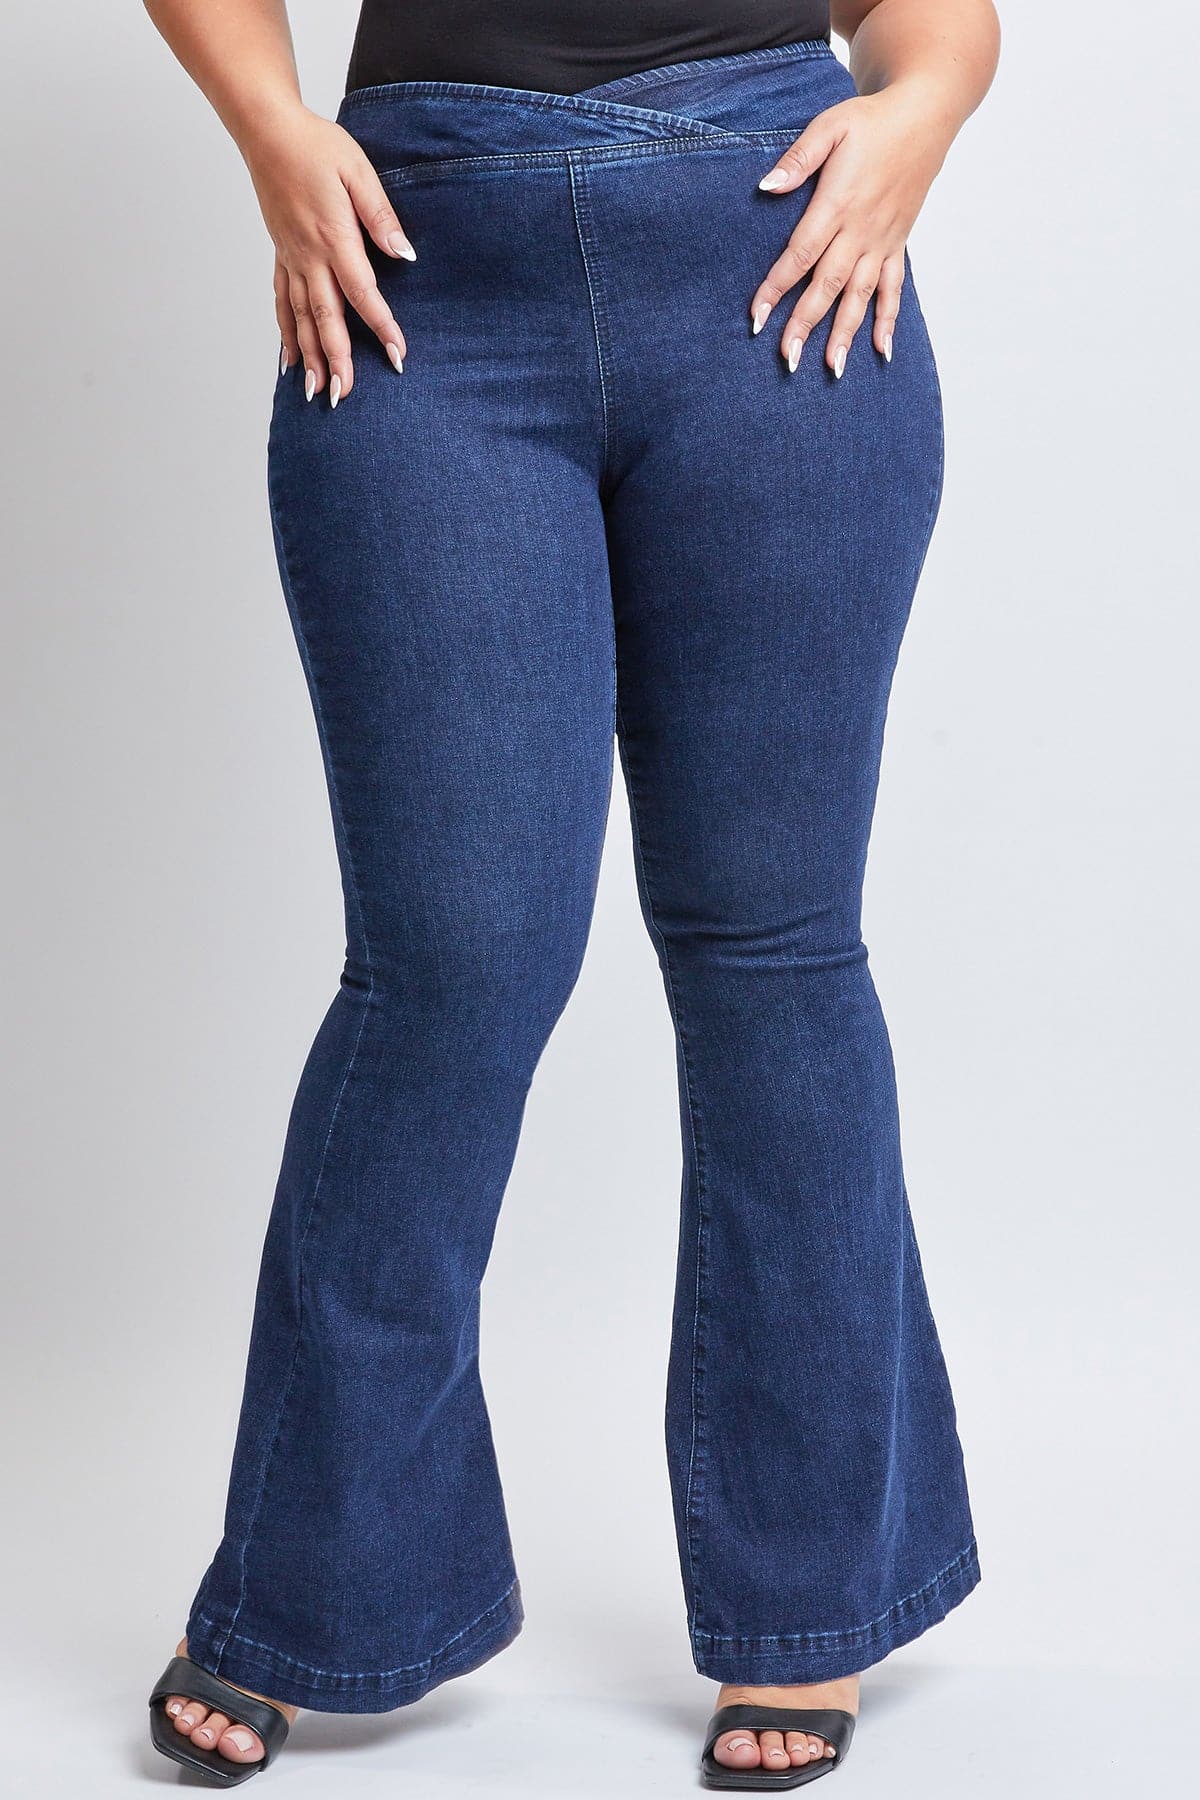 Plus Size Women's V-Front Pull On Flare Jeans-Sale